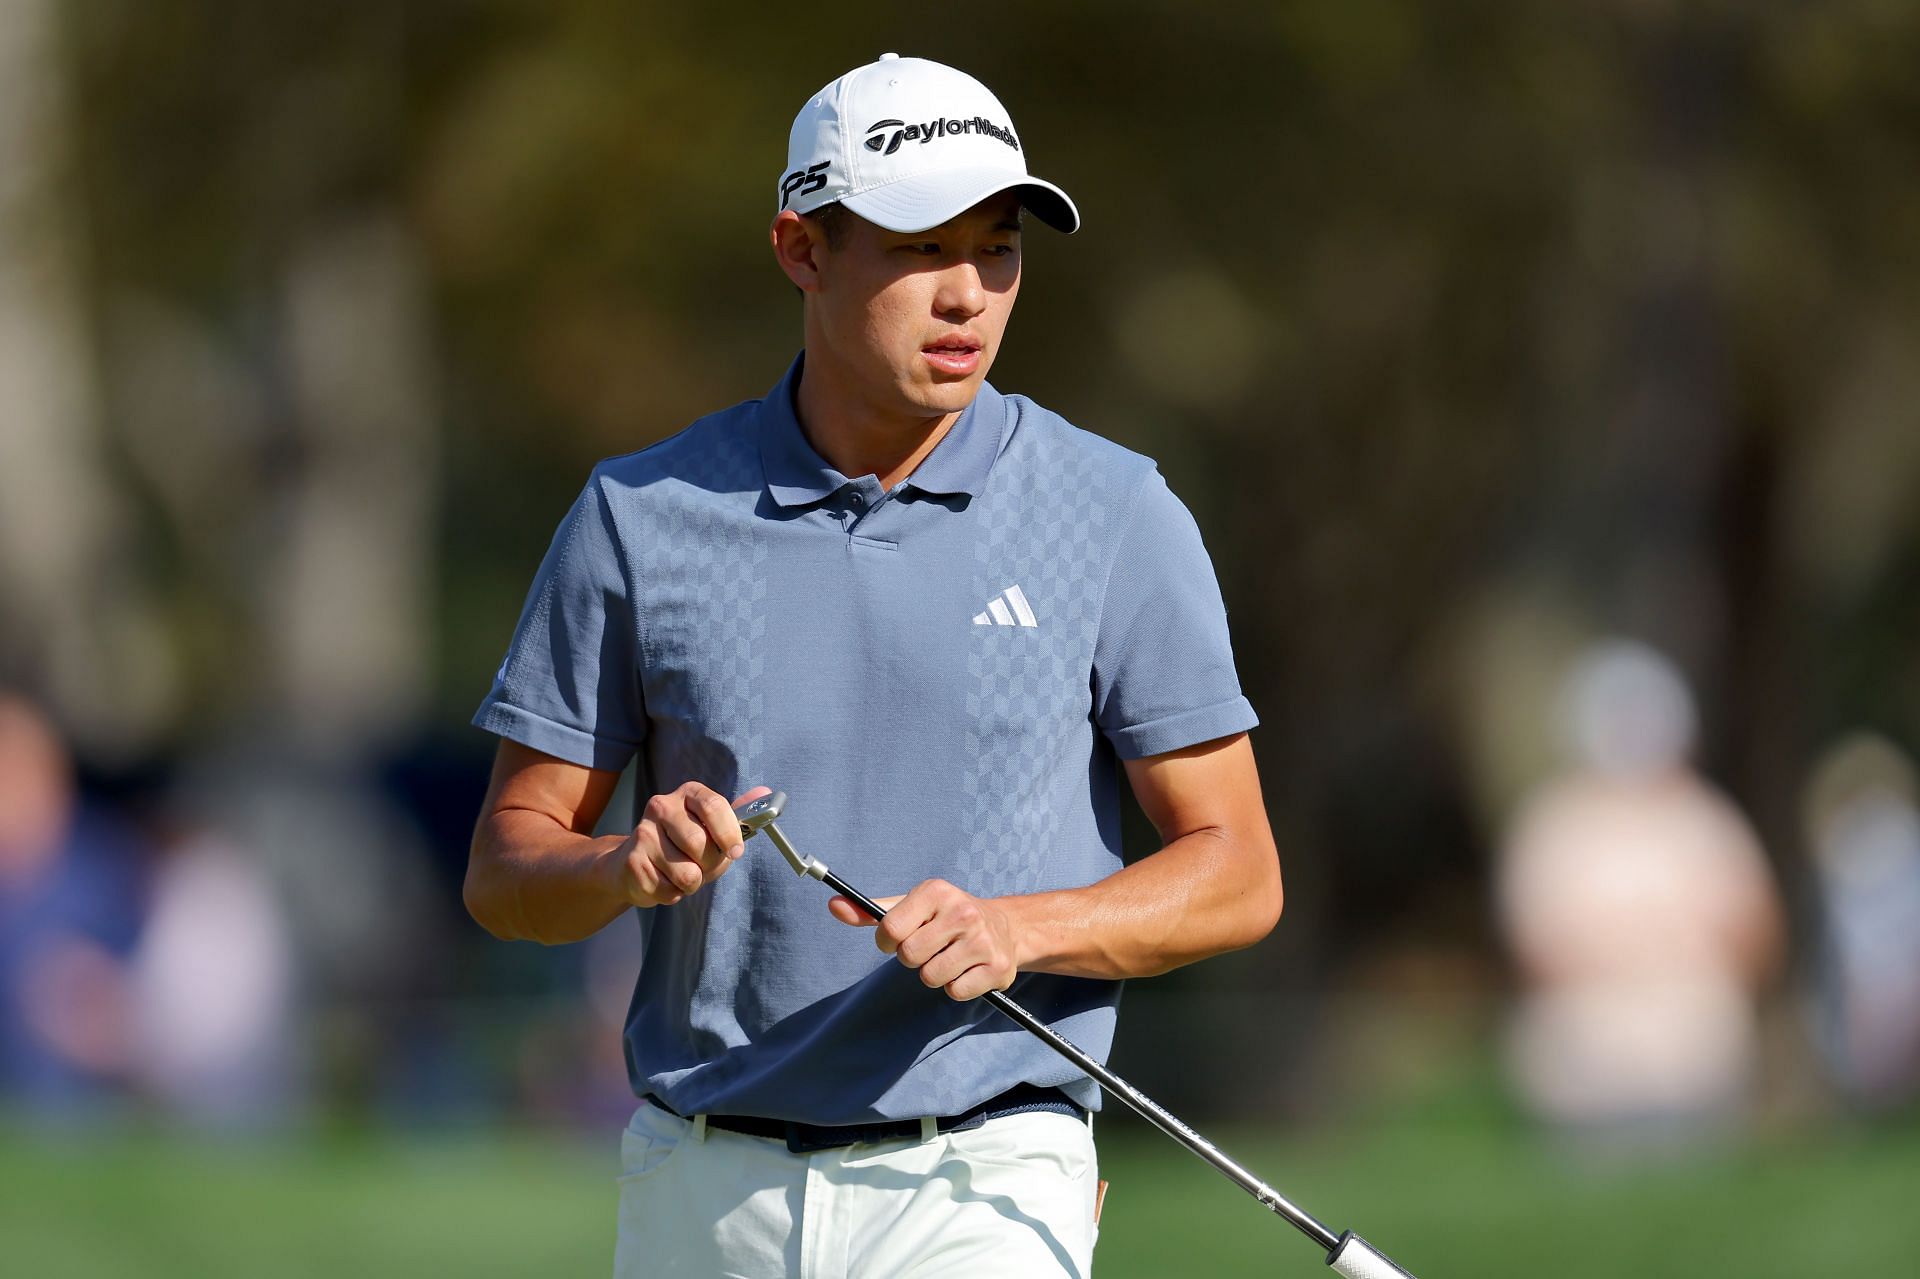 THE PLAYERS Championship - Round Two